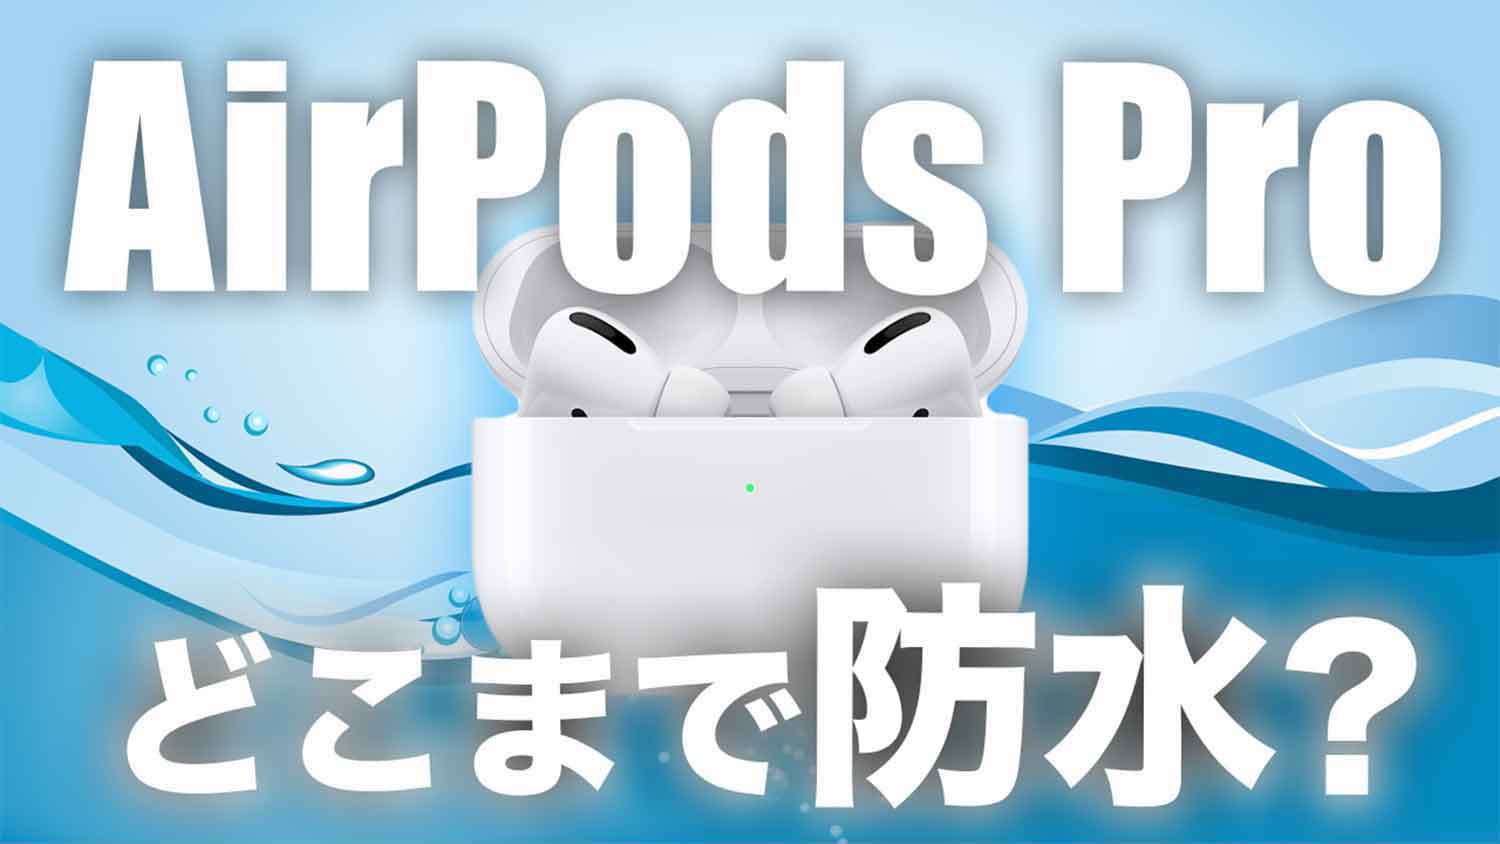 Airpods-pro-water